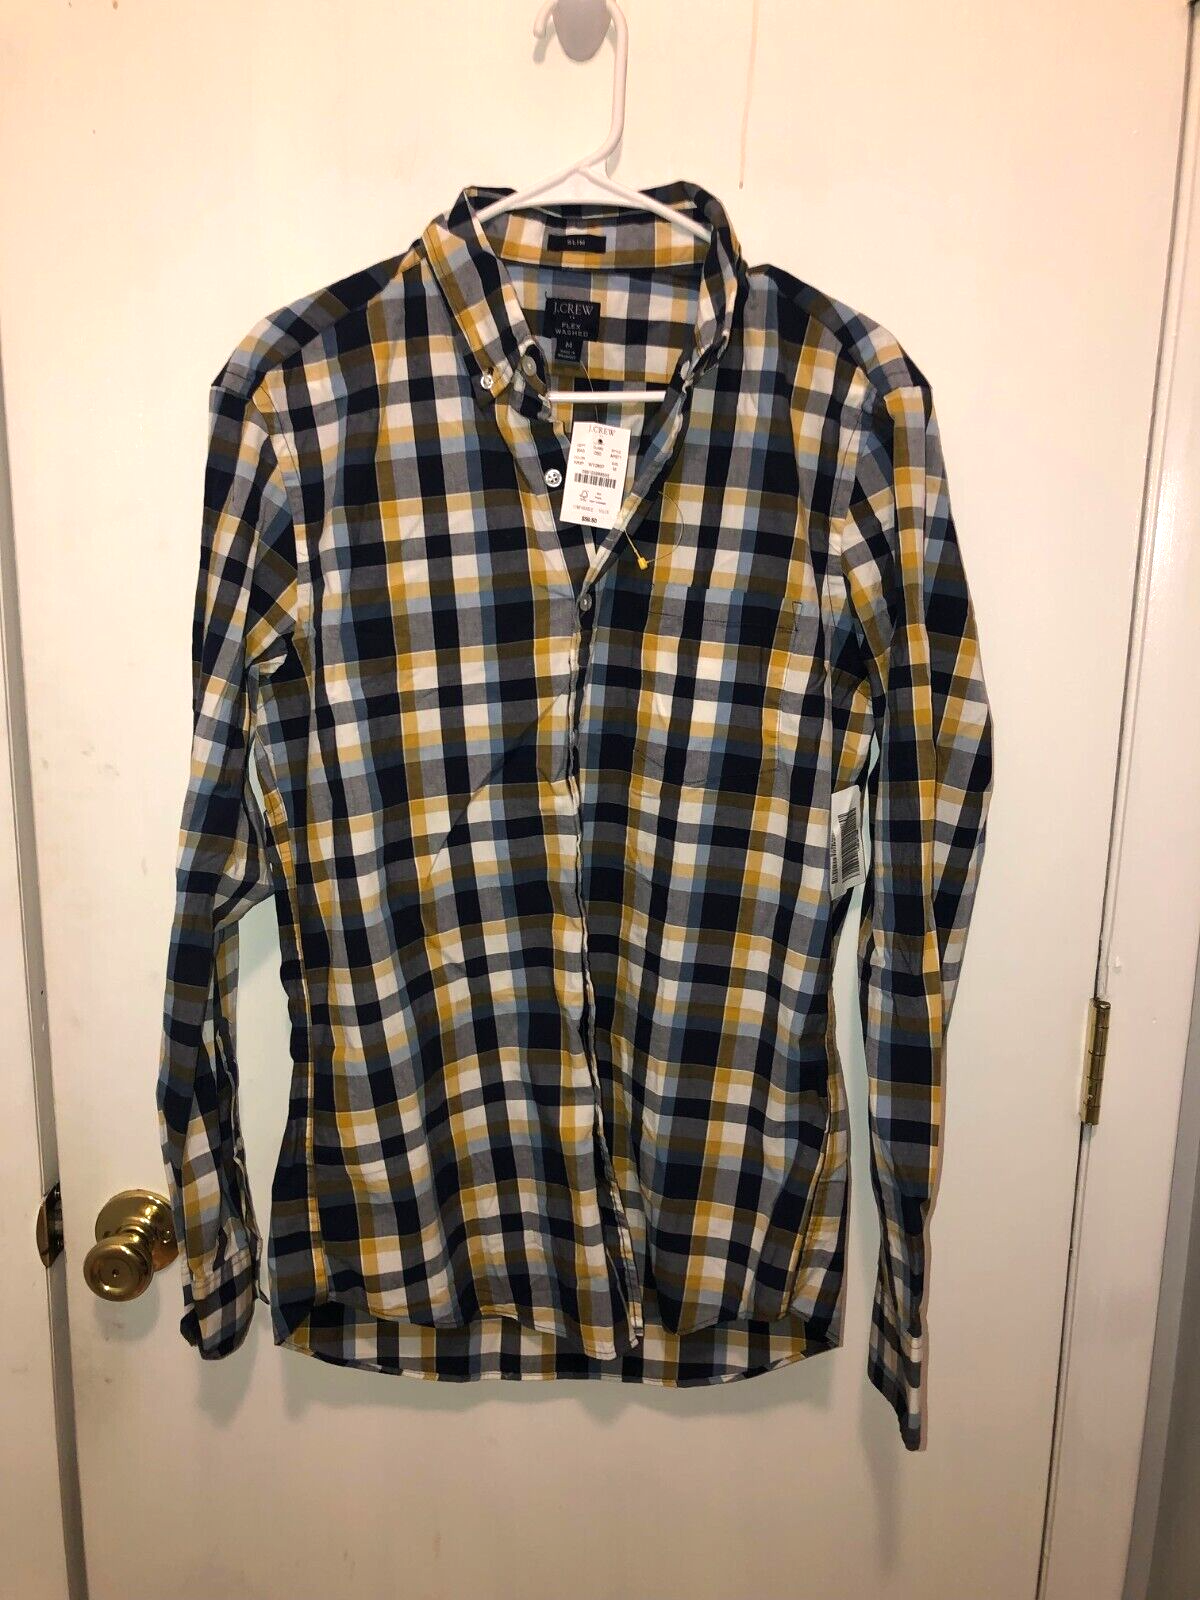 Primary image for NWT J Crew Flex Washed Mens Medium Slim Fit Plaid Long Sleeve Button Up Shirt